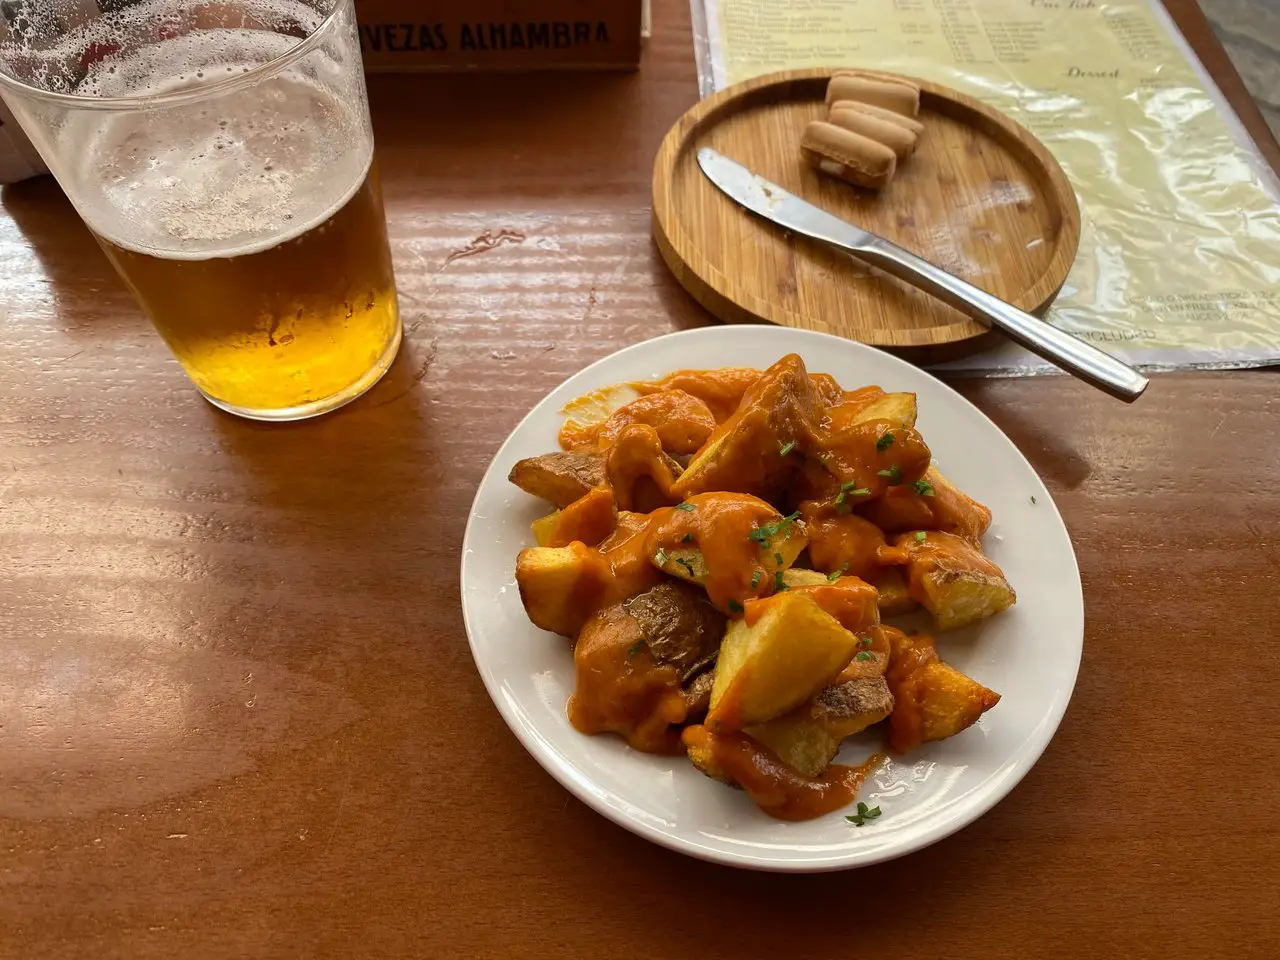 A plate of patatas bravas with a pint of Spanish beer.